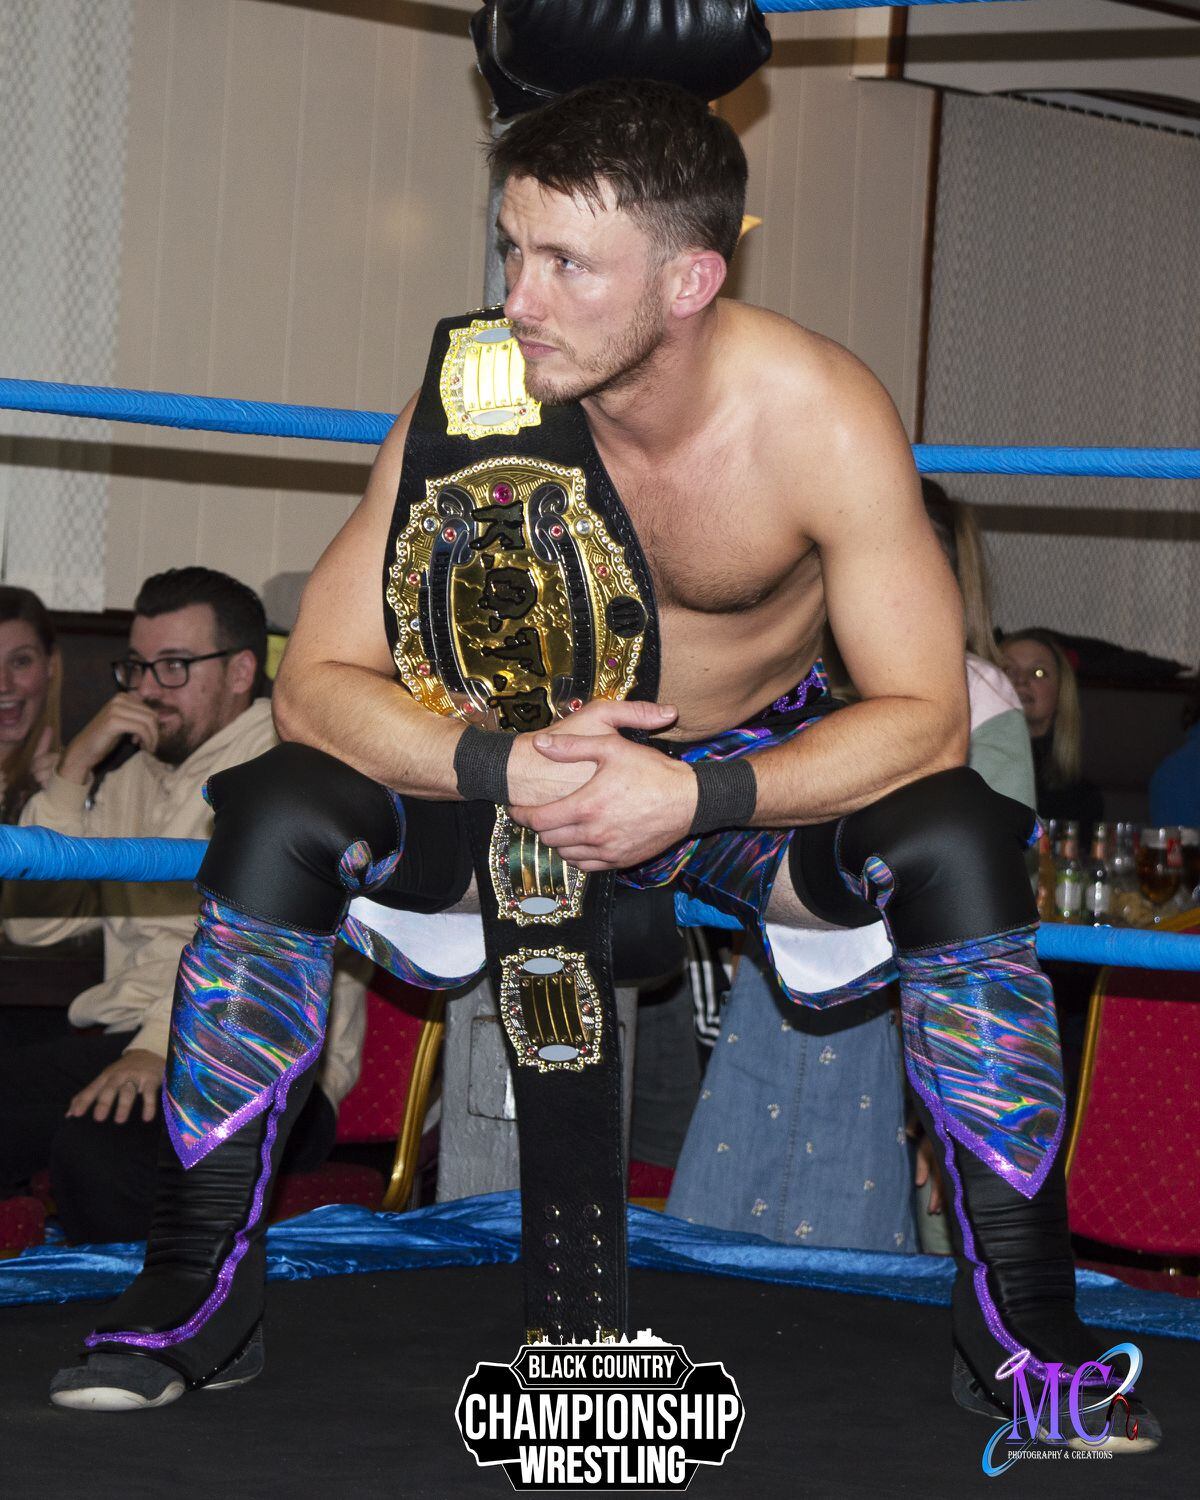 Lucas Casmere is the current King of the Division champion. Photo: MC Photography and Creations